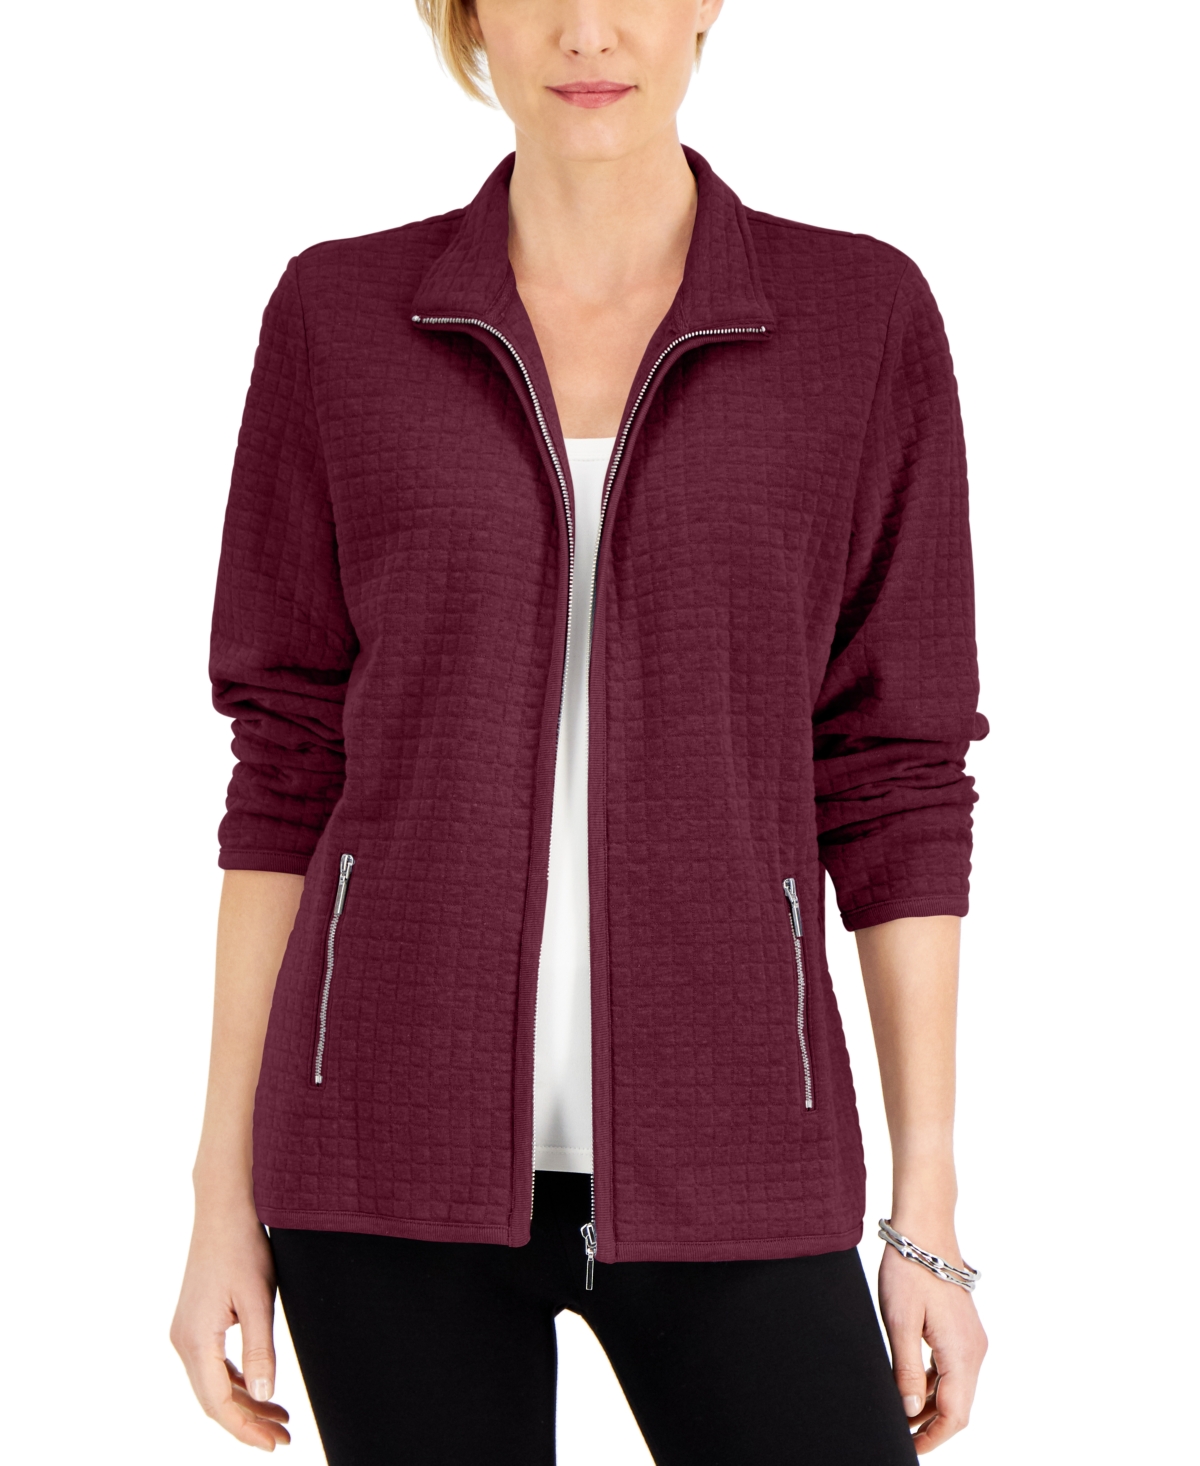 Quilted Fleece Jacket, Created for Macy's - Malbec